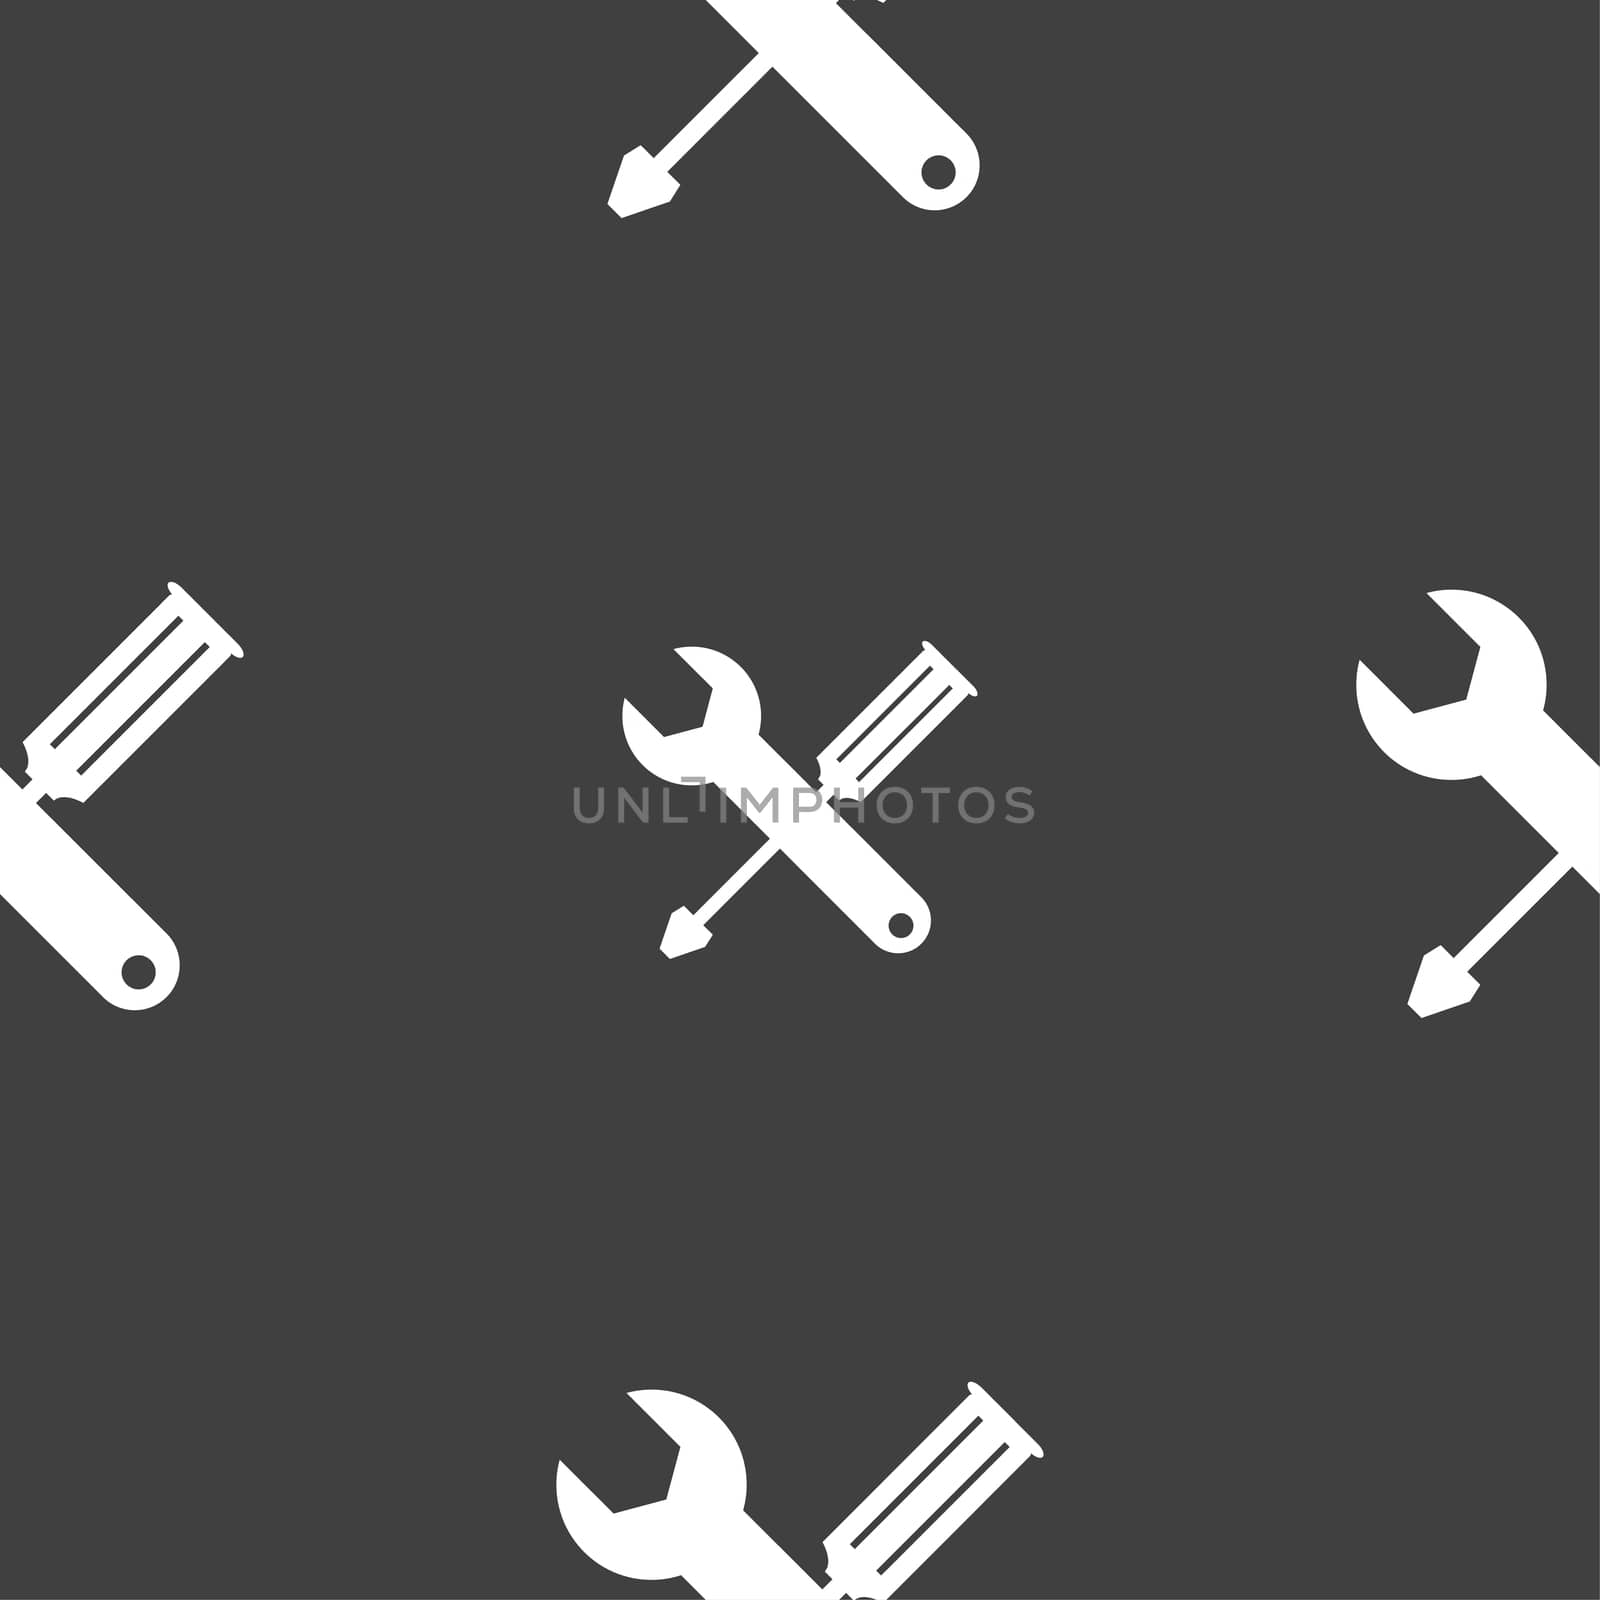 Repair tool sign icon. Service symbol. screwdriver with wrench. Seamless pattern on a gray background. illustration